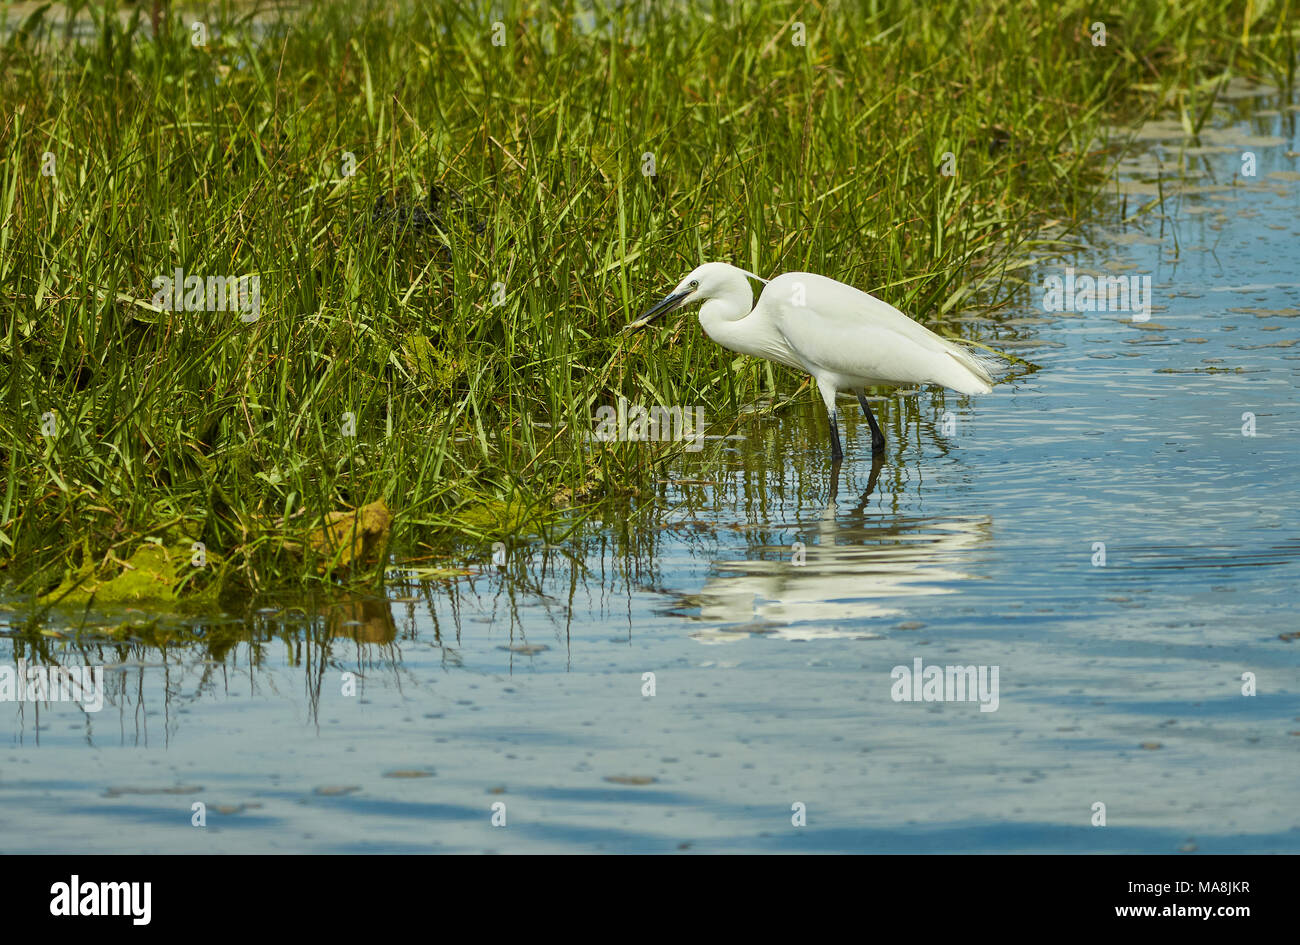 A Little Egret (Egretta Garzetta) in wetland with a small fish in its beak just after being caught from the water, England, UK Stock Photo